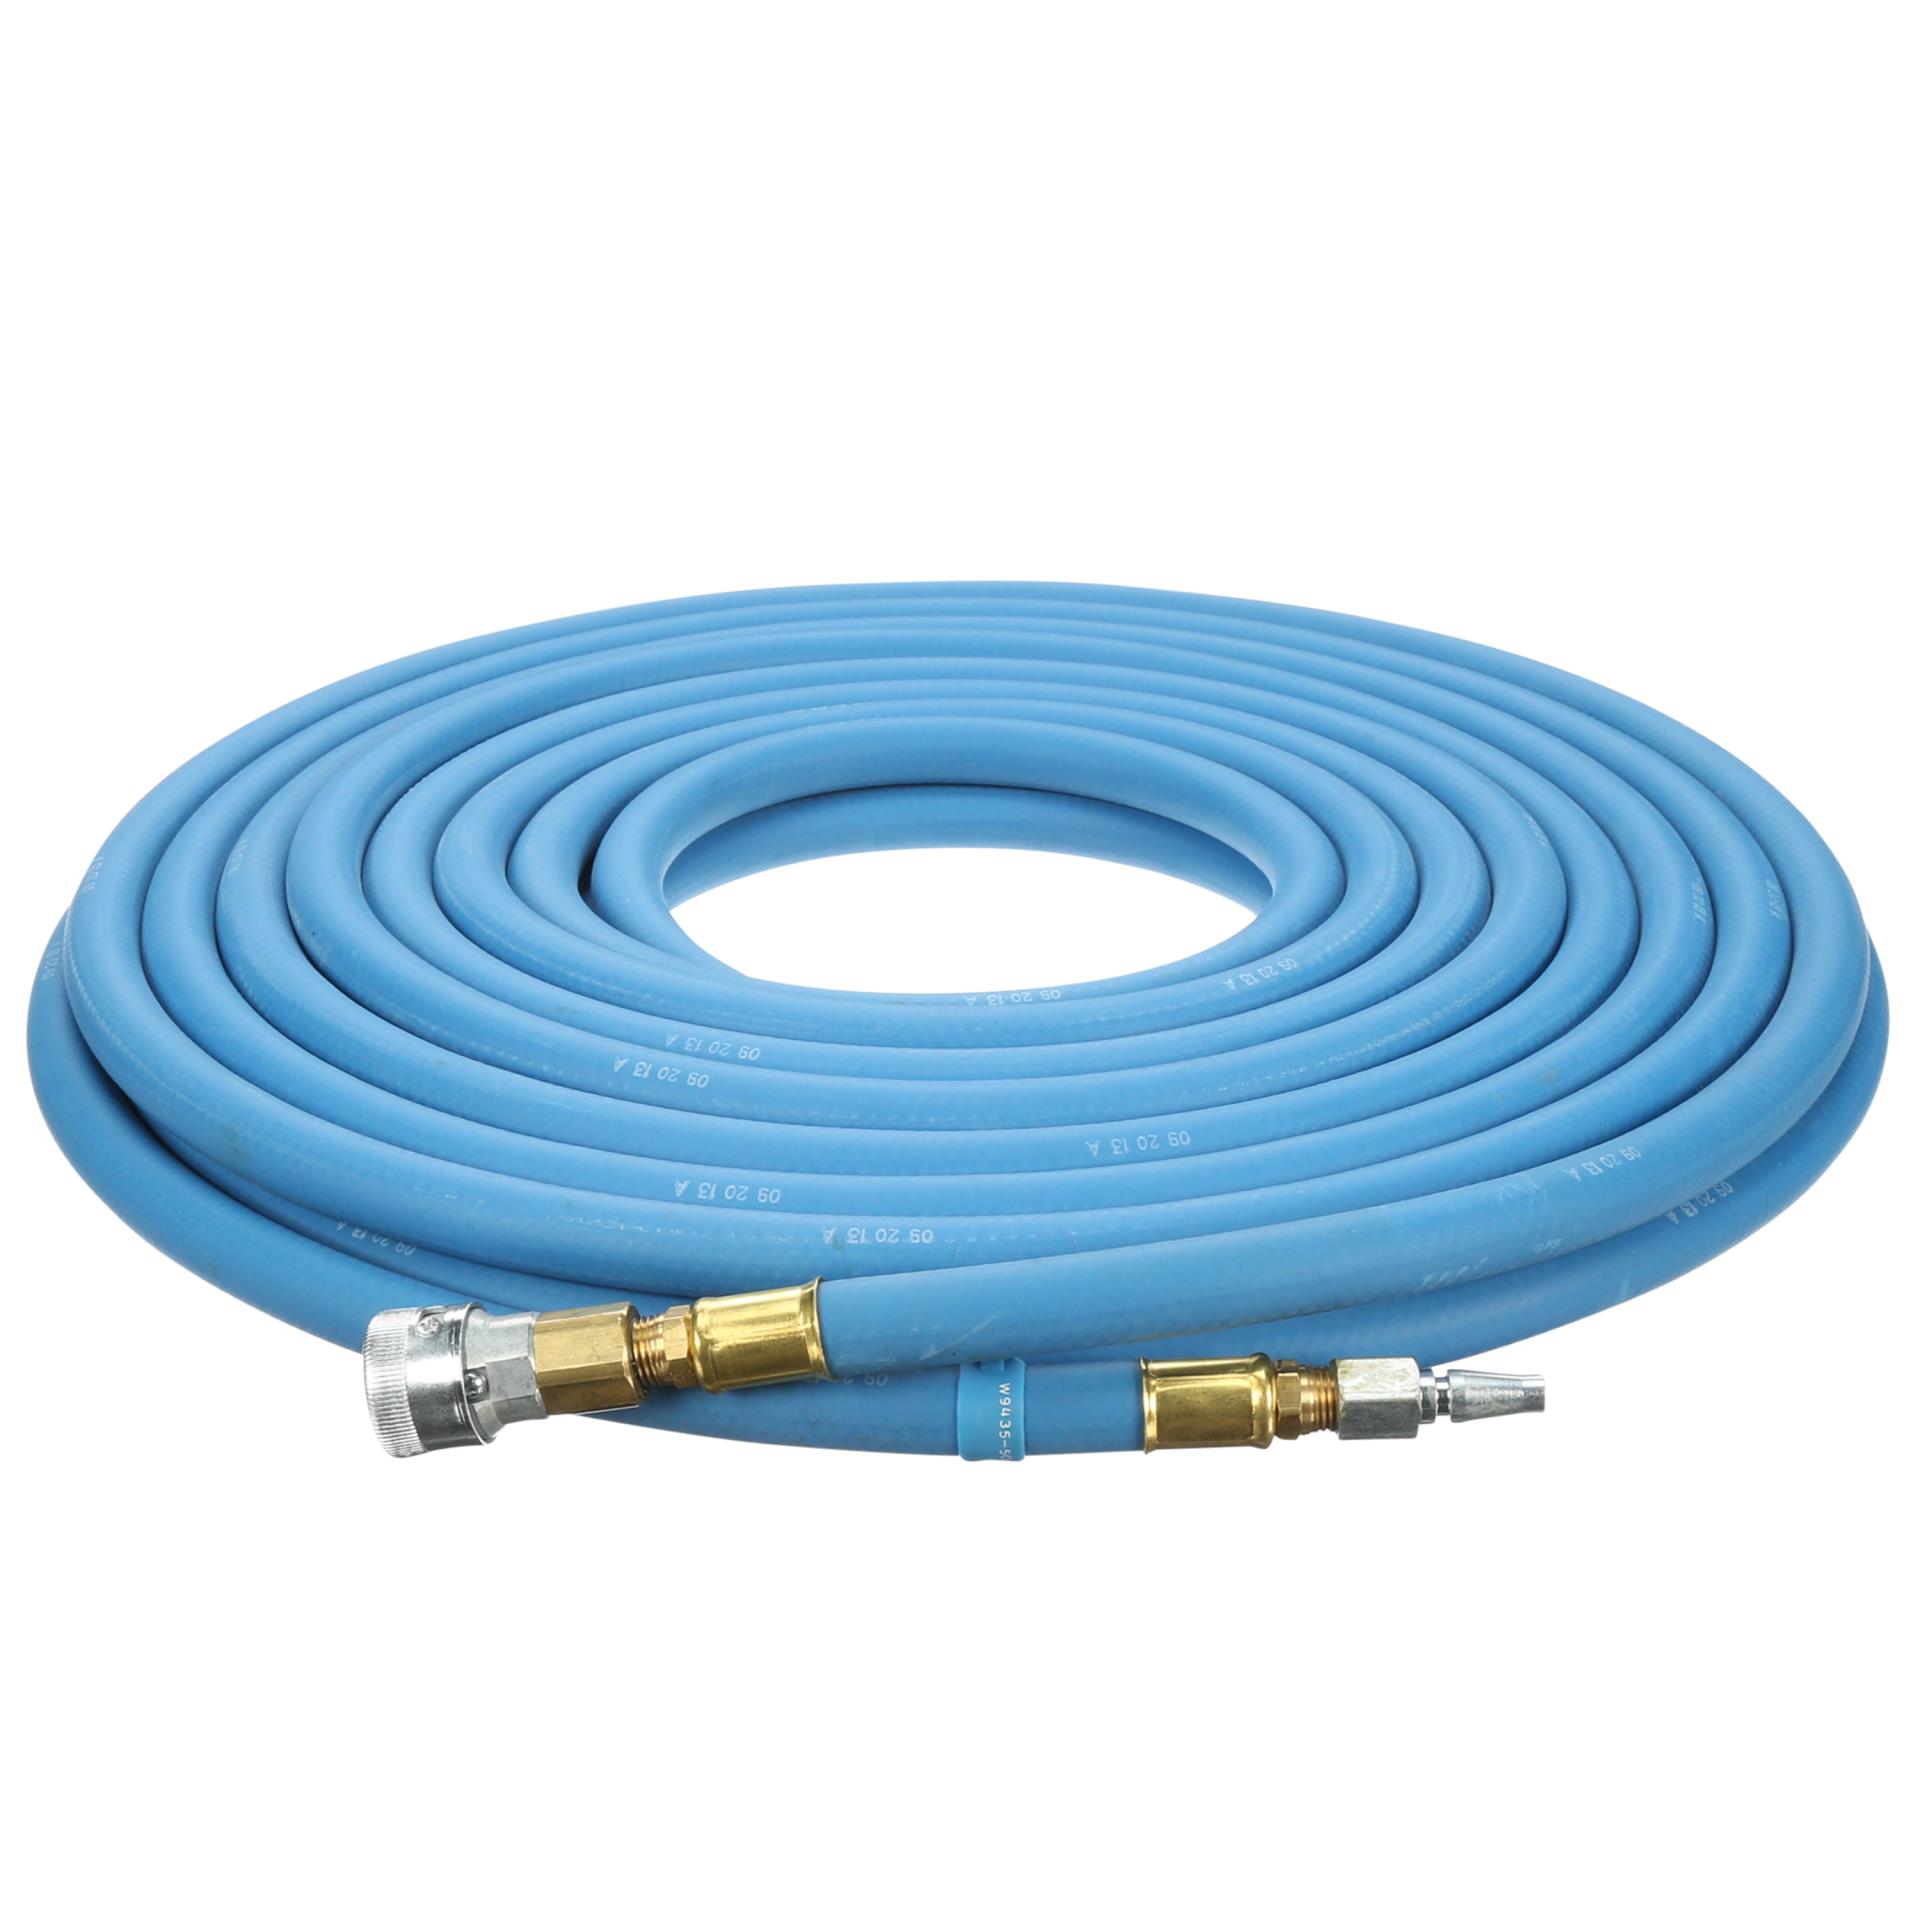 00051138727956 3M™ Supplied Air Hose W-9445-100, 100 ft, 3/8 in ID,  Schrader Fittings, High Pressure 1/Case Aircraft products 3M 9358747